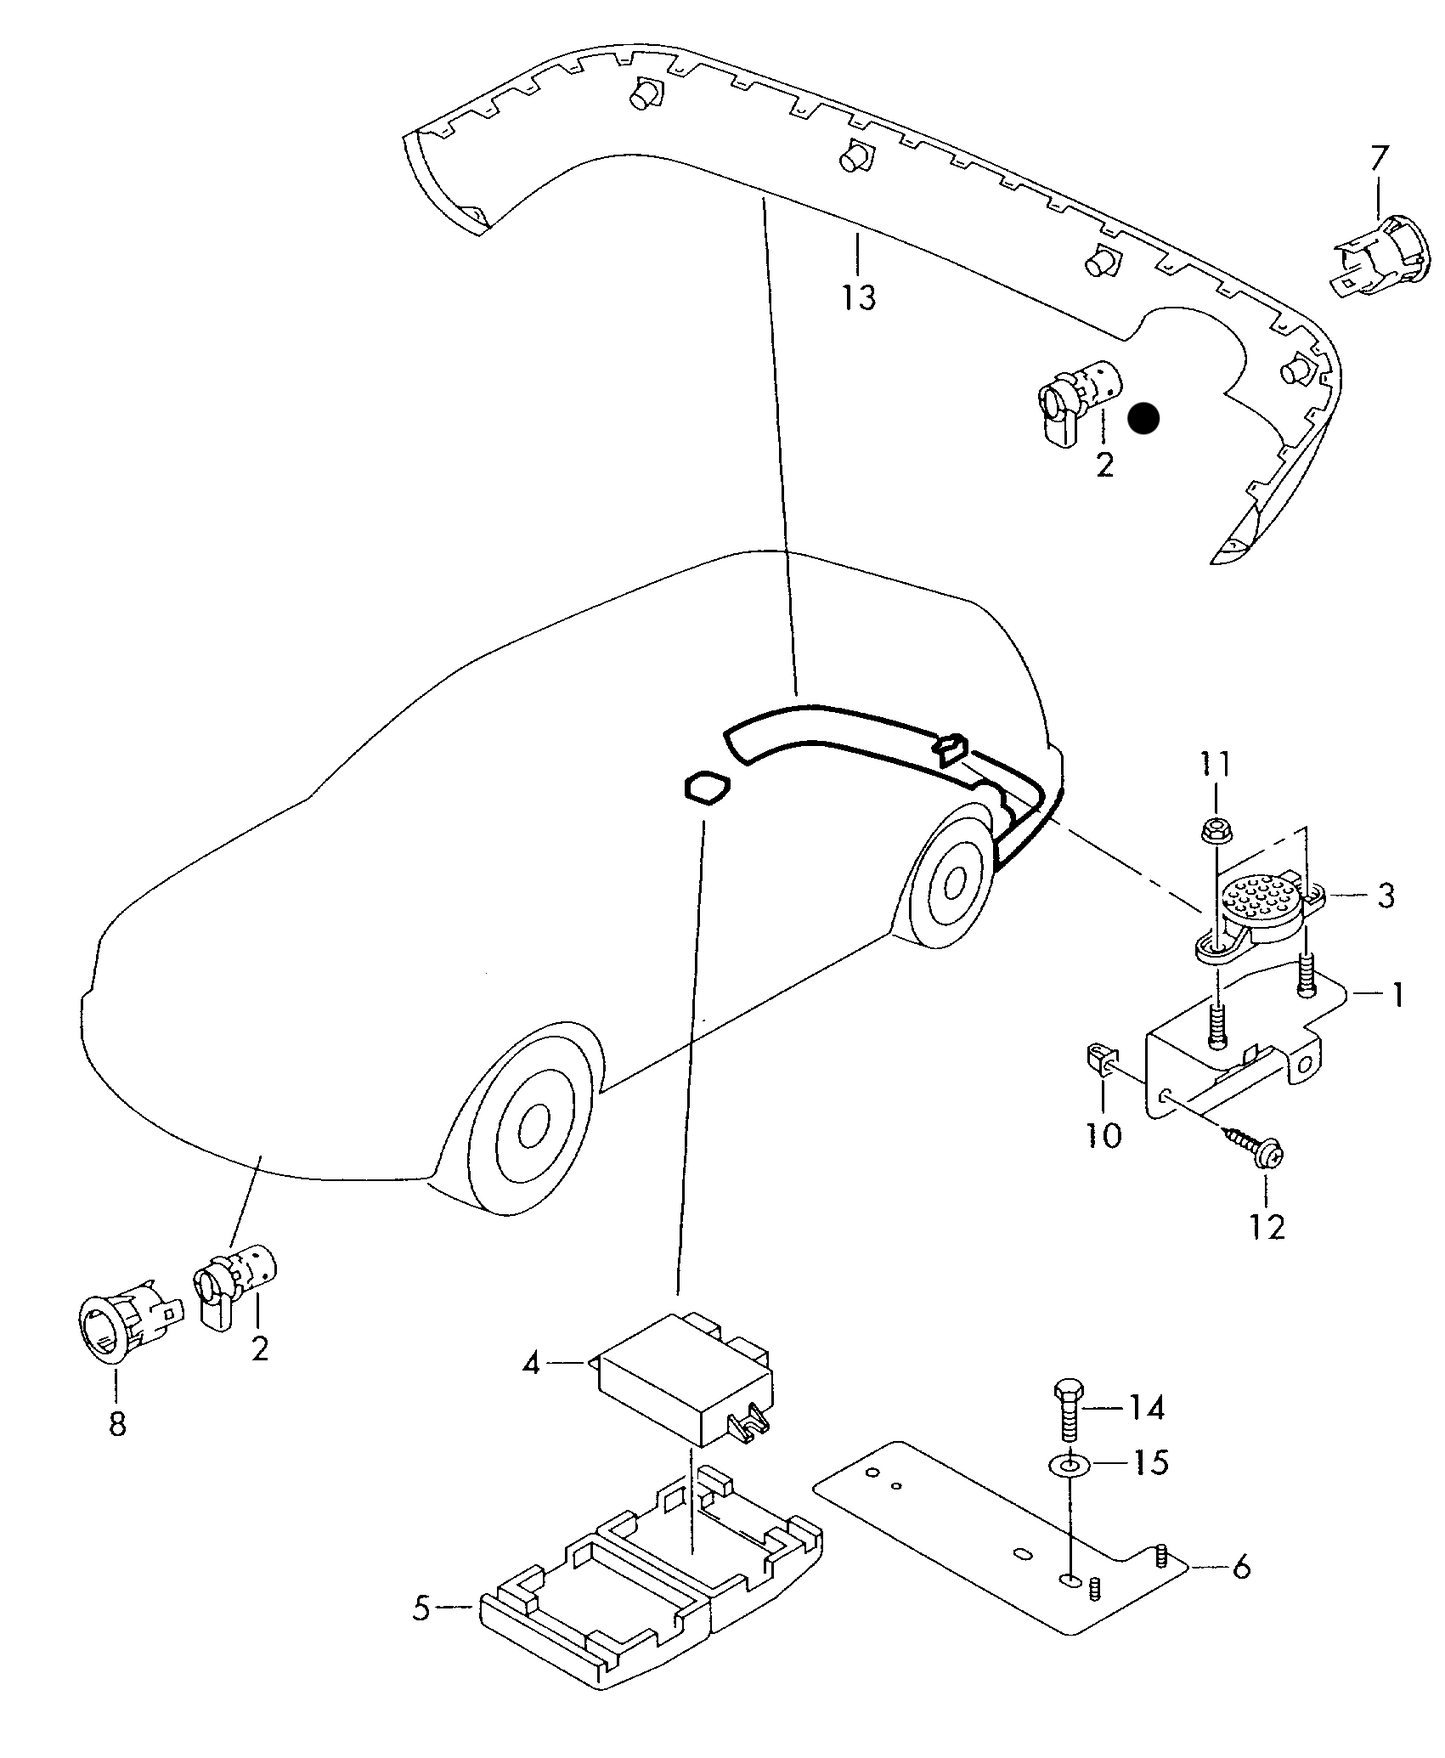 919-020 Audi A2 2000>2005 Rear parking aid ‘Please select parts from links below, prices will update’